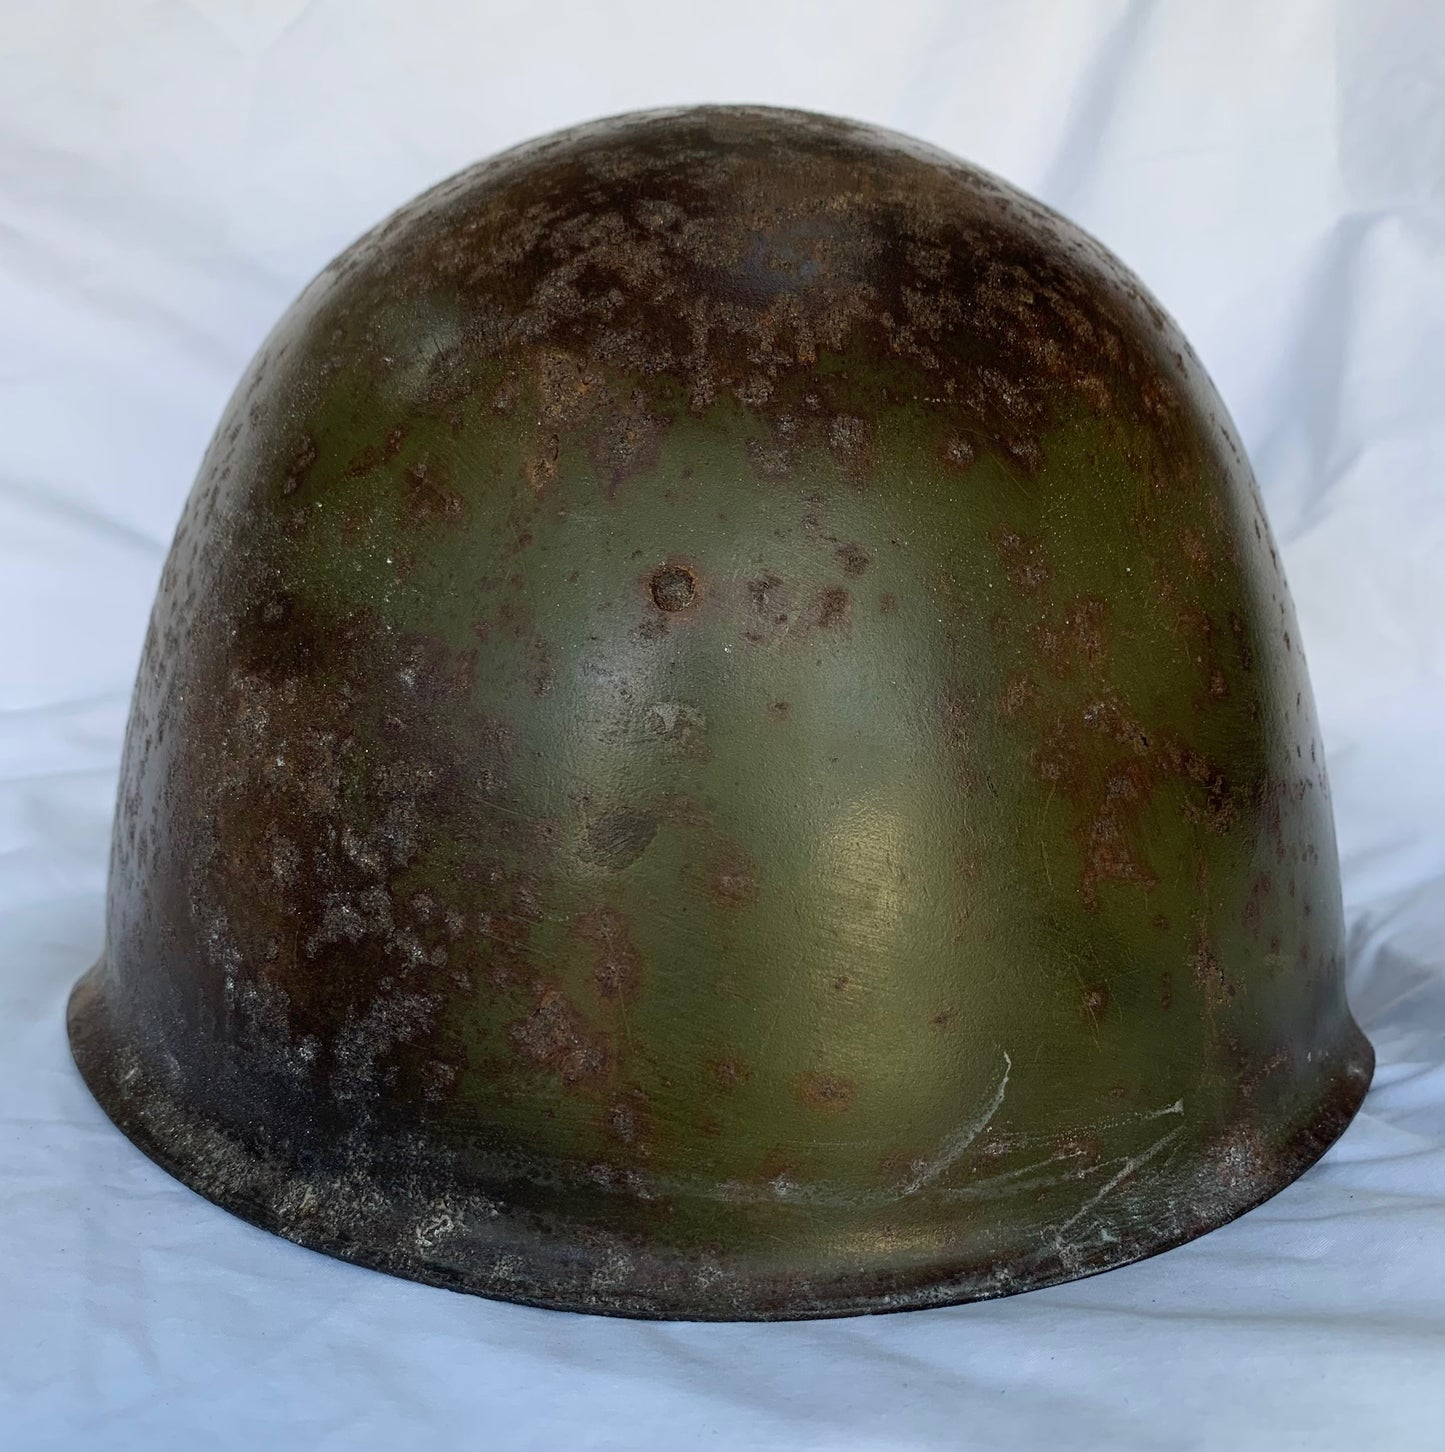 WW2 Russian SSh-39 Helmet with Liner and Chinstrap.